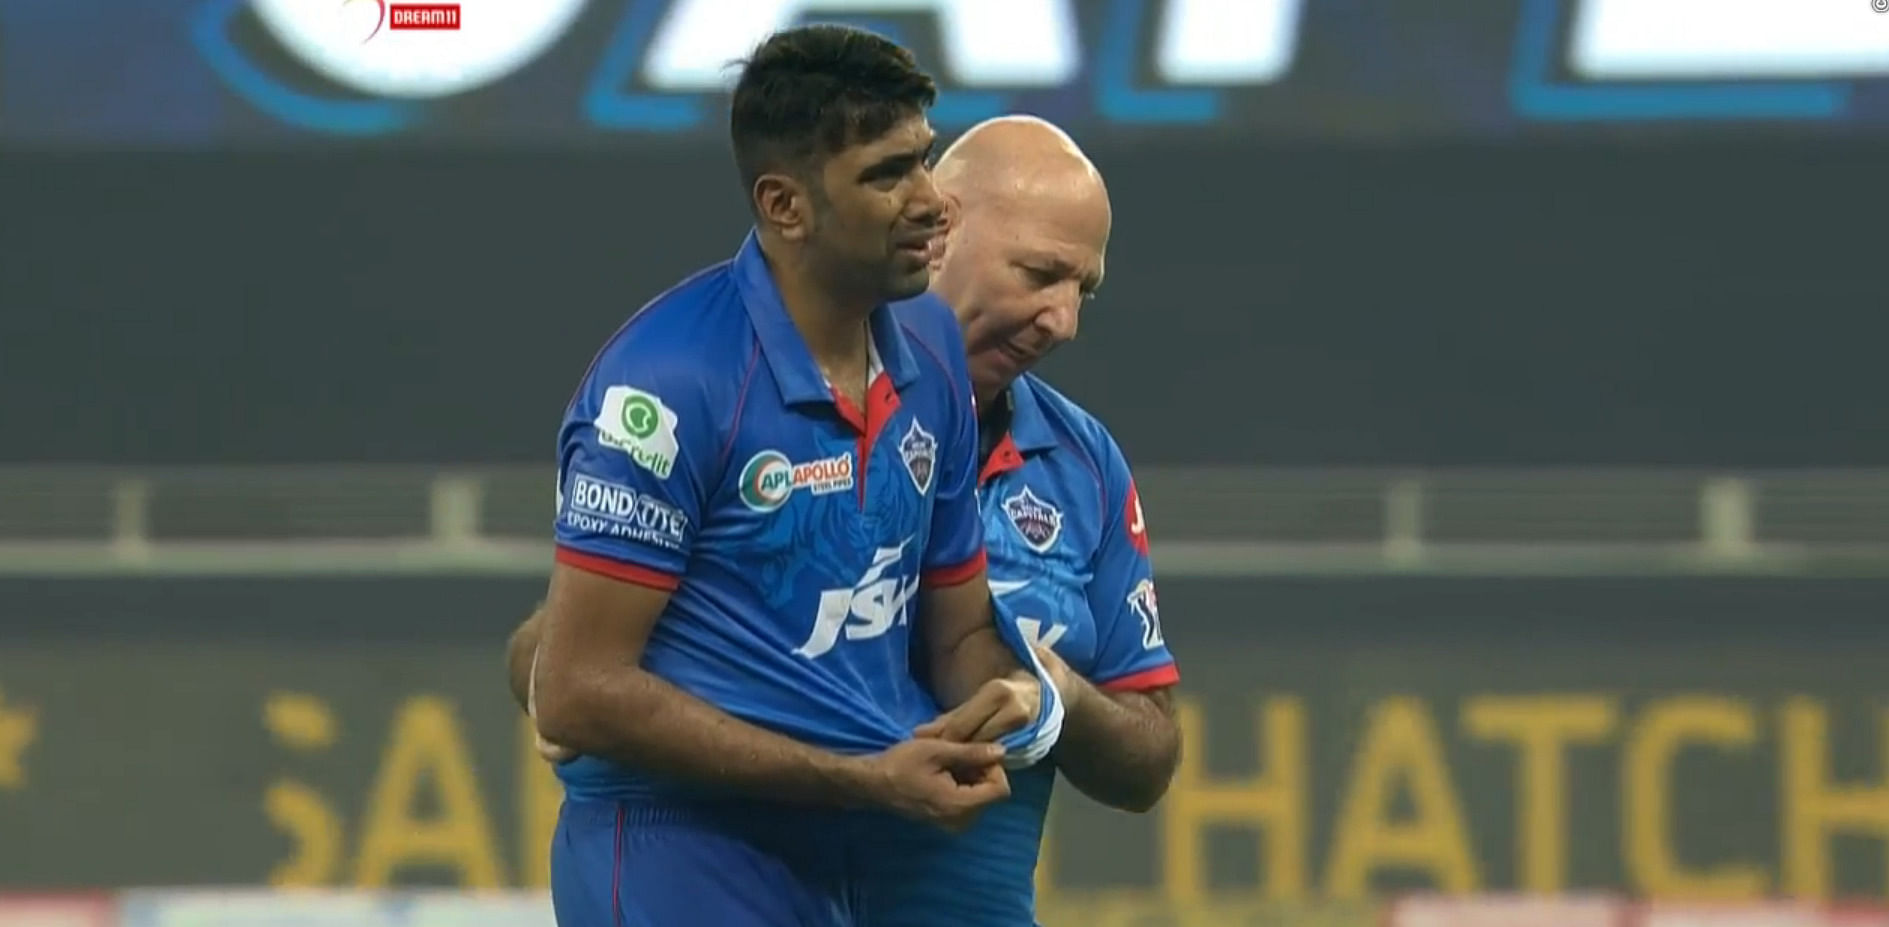 Writhing in pain, Ashwin's jersey became a temporary sling as he left the field along with Capitals' physio Patrick Farhart. Credit: iplt20.com